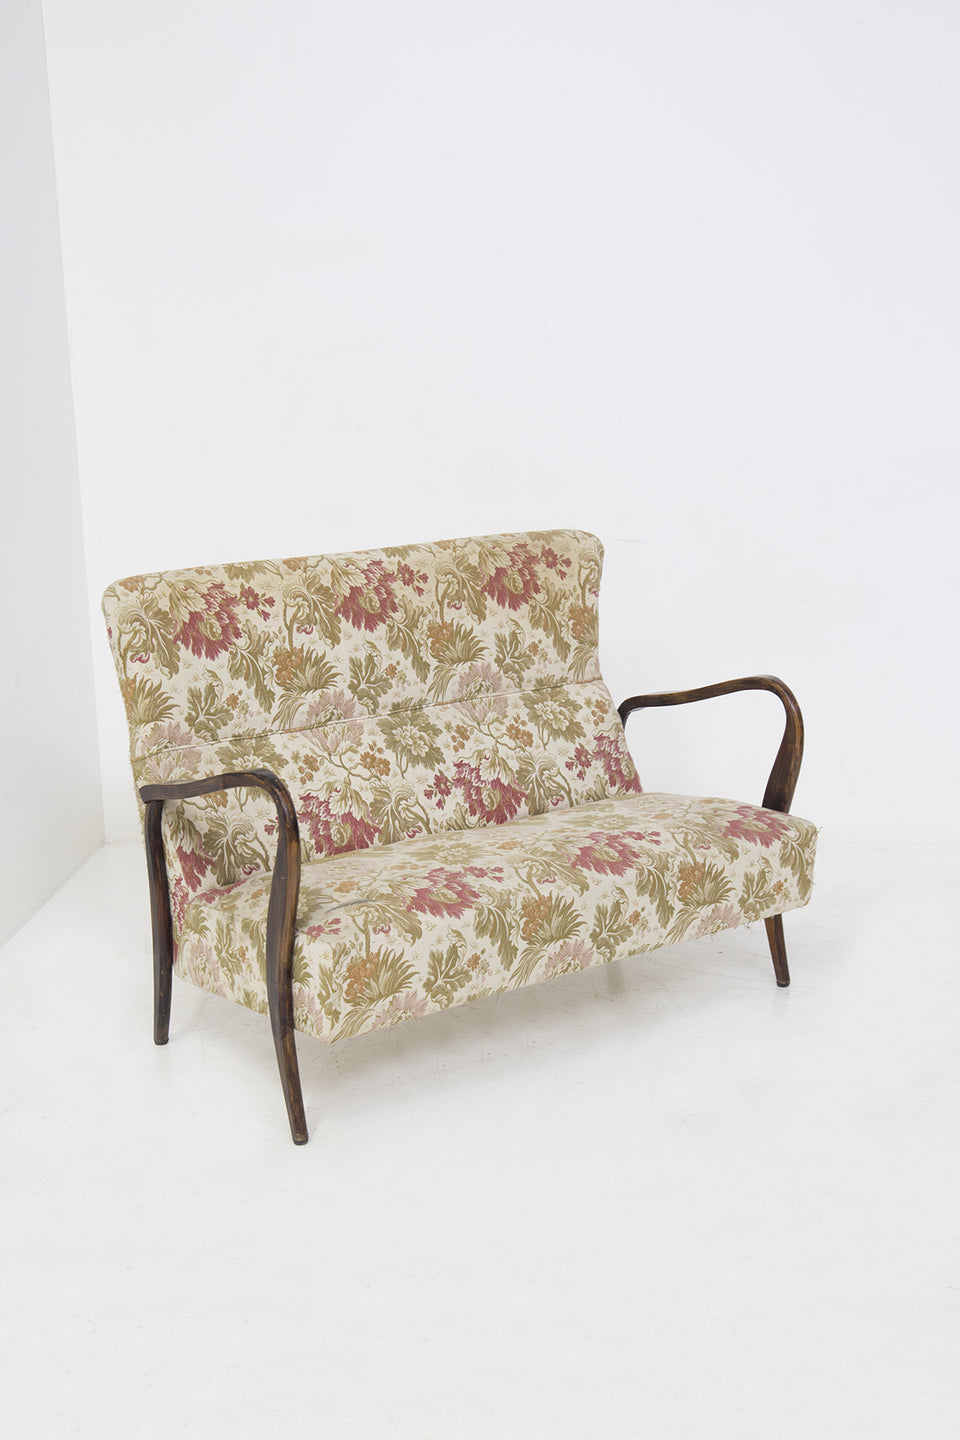 Paolo Buffa Vintage Sofa in Wood and Floral Fabric (Attr.)